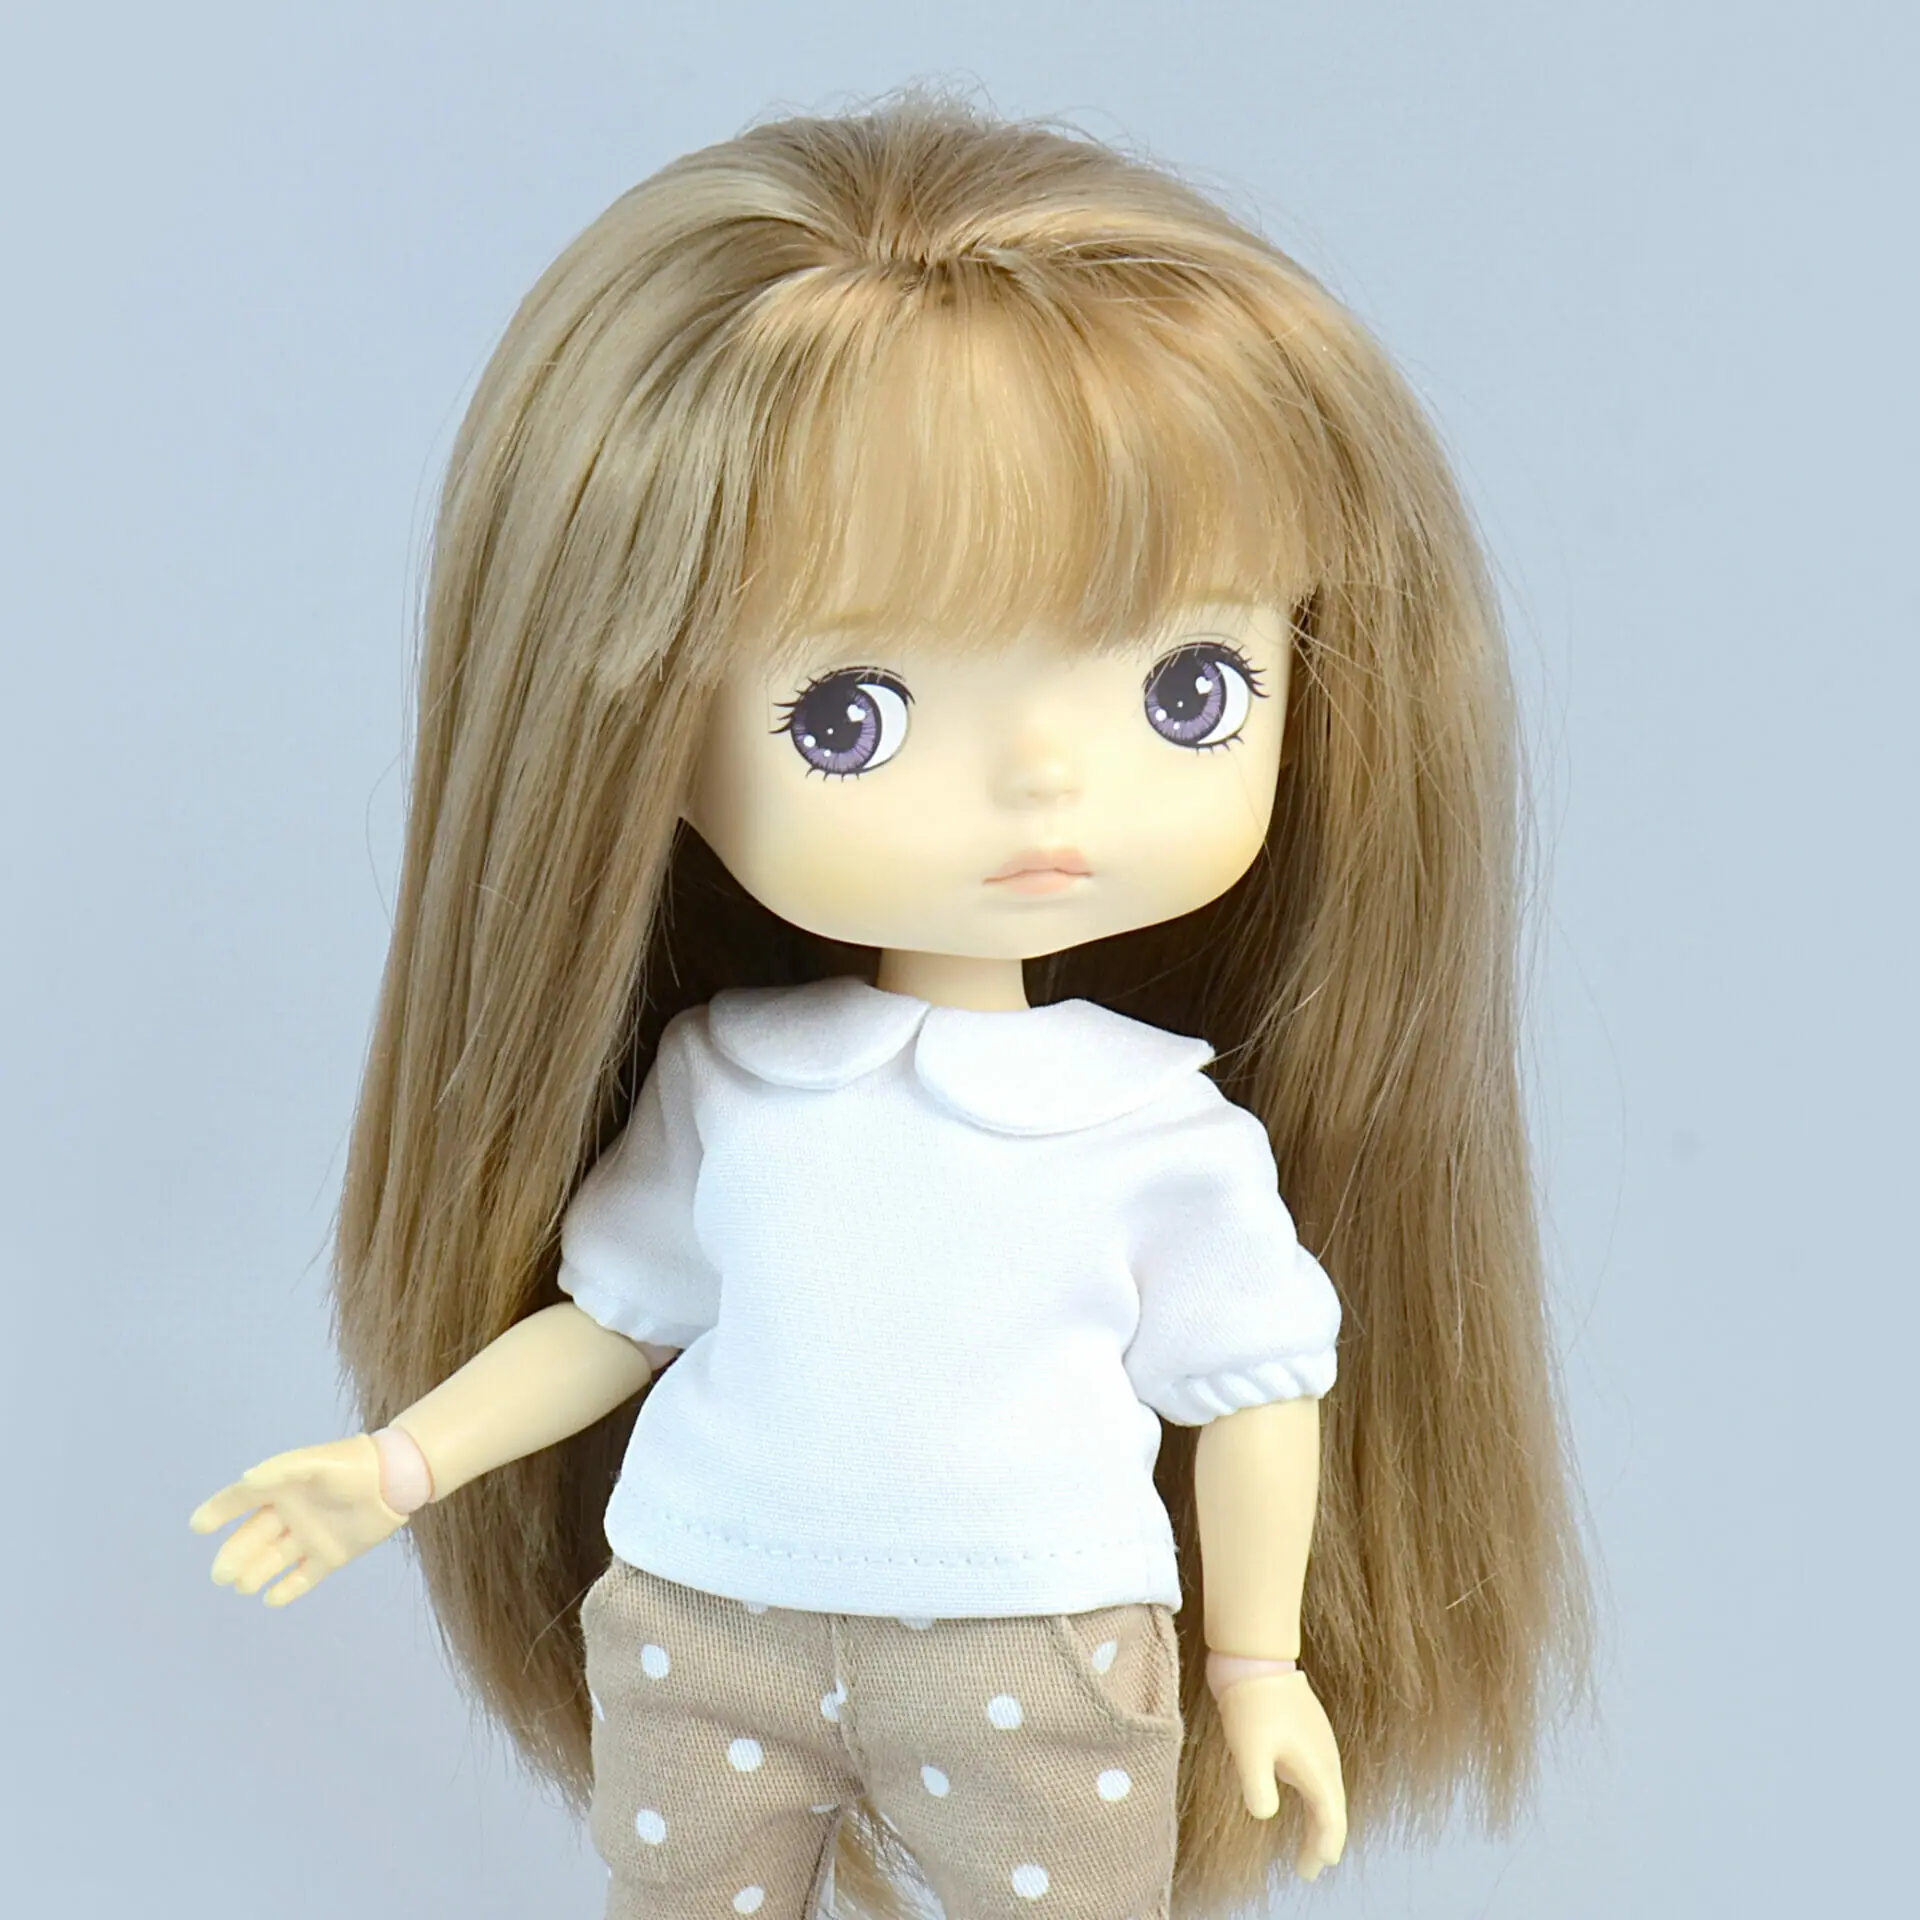 Outfit for Xiaomi Monst, Holala dolls (3 items)